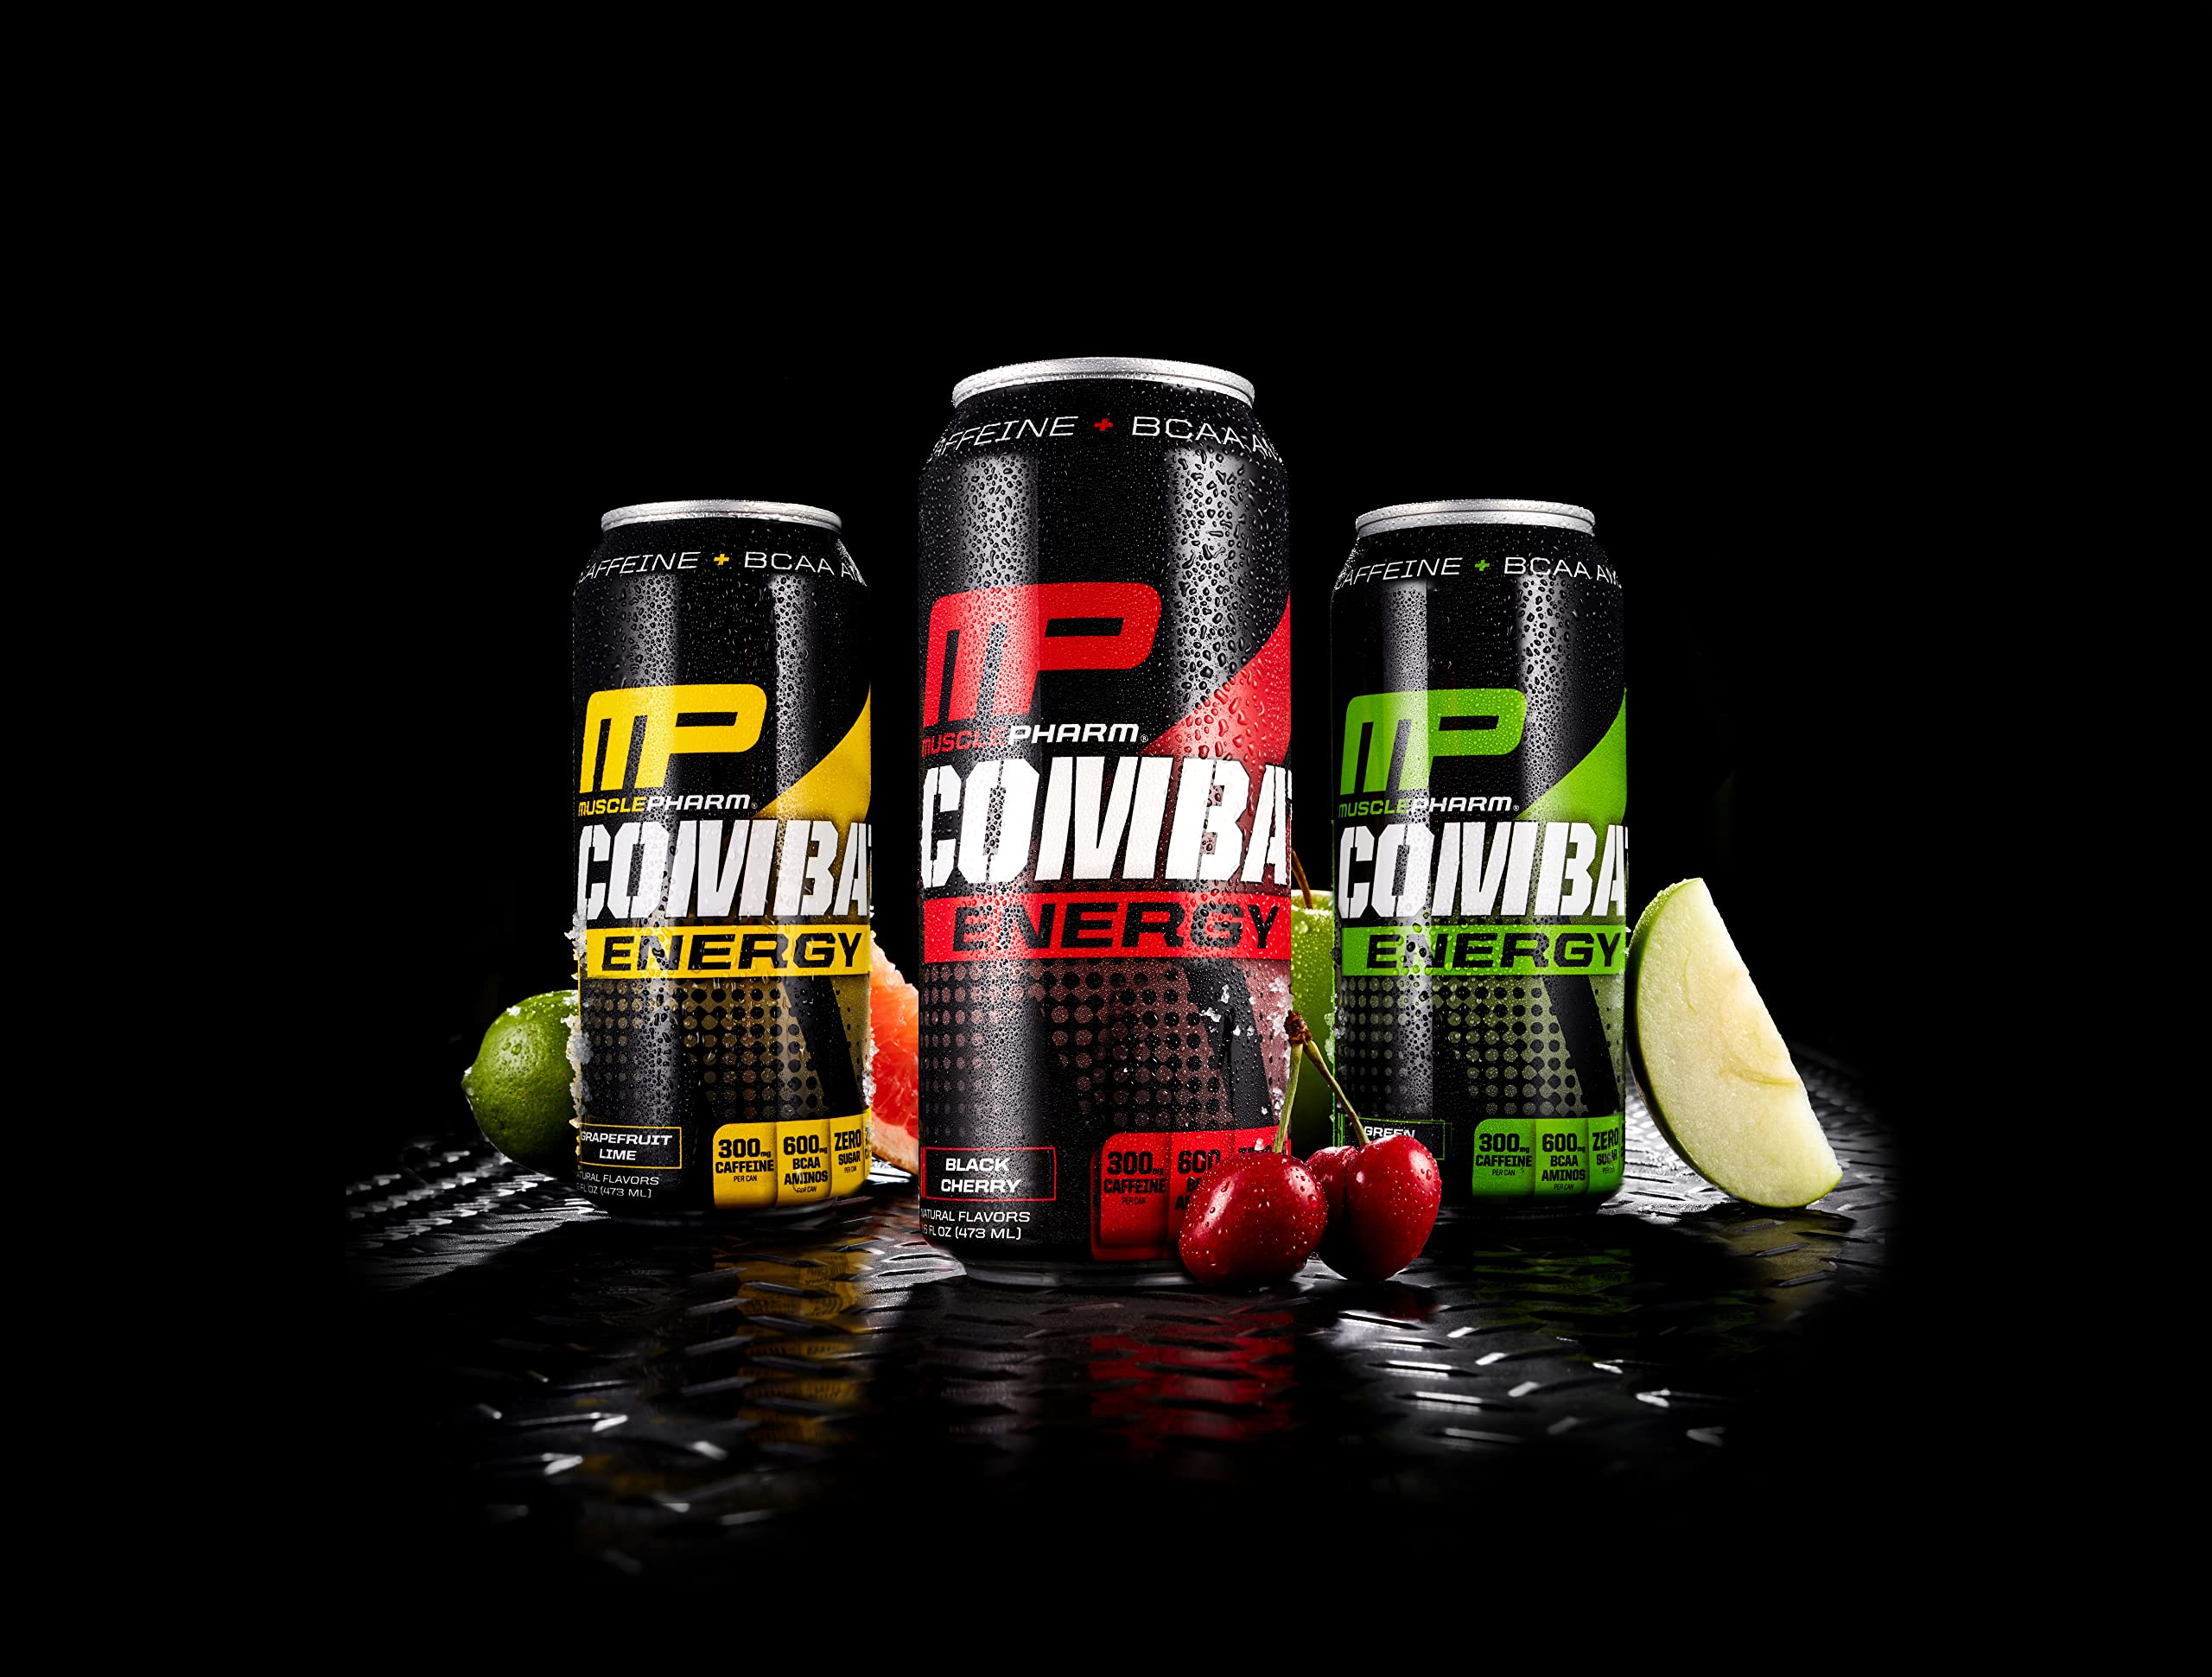 MusclePharm Combat Energy Drink 16oz (Pack of 12) Variety Pack - Grapefruit Lime, Green Apple & Black Cherry - Sugar Free Calories Free - Perfectly Carbonated with No Artificial Colors or Dyes